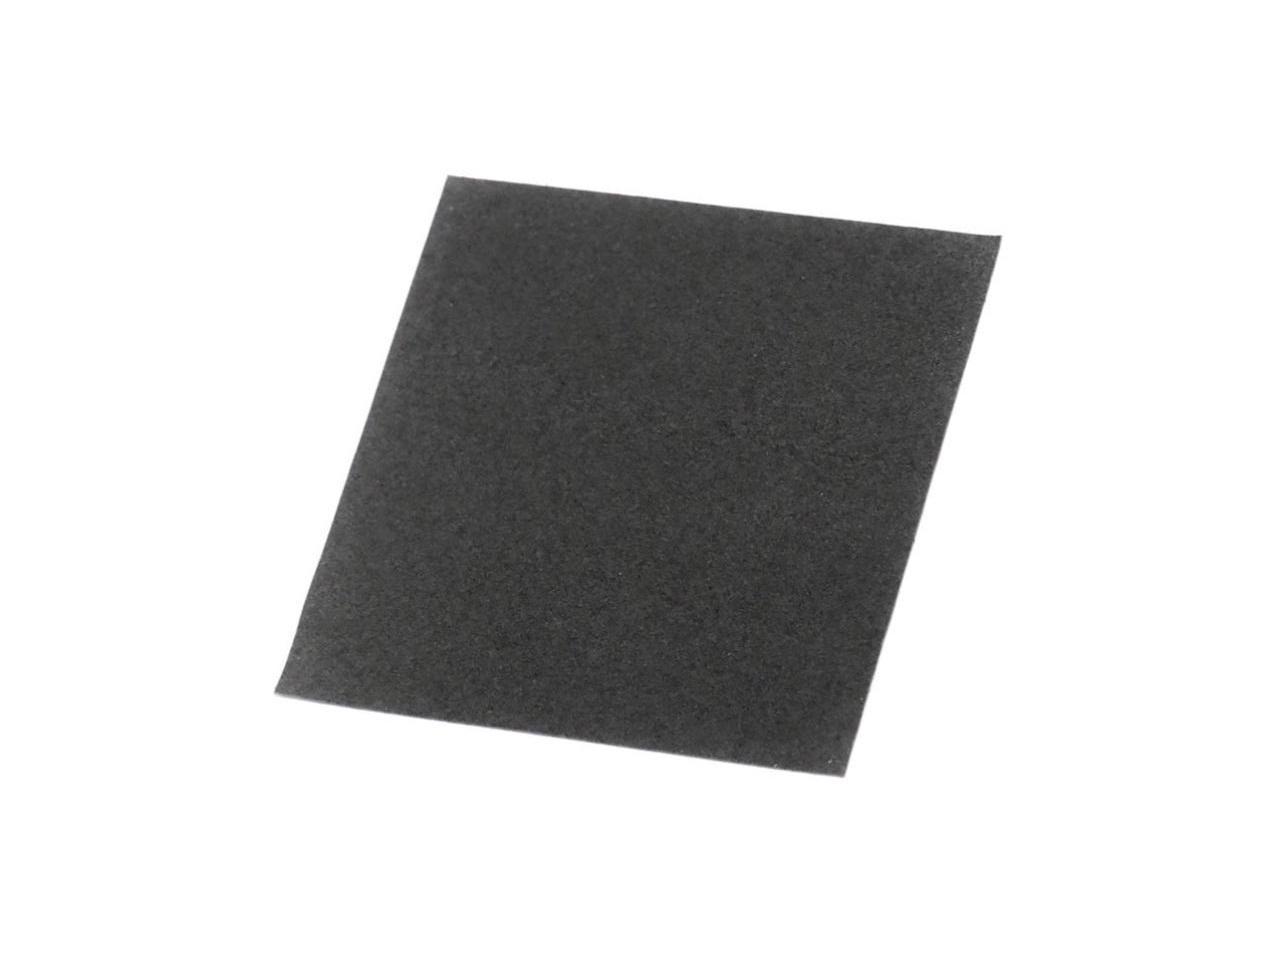 Thermal Grizzly Carbonaut - Carbon Thermal Pad 32x32x0.2mm, Flexible and Reusable, Non-Adhesive, Very High Thermal Conductivity, Conducts Electricity!